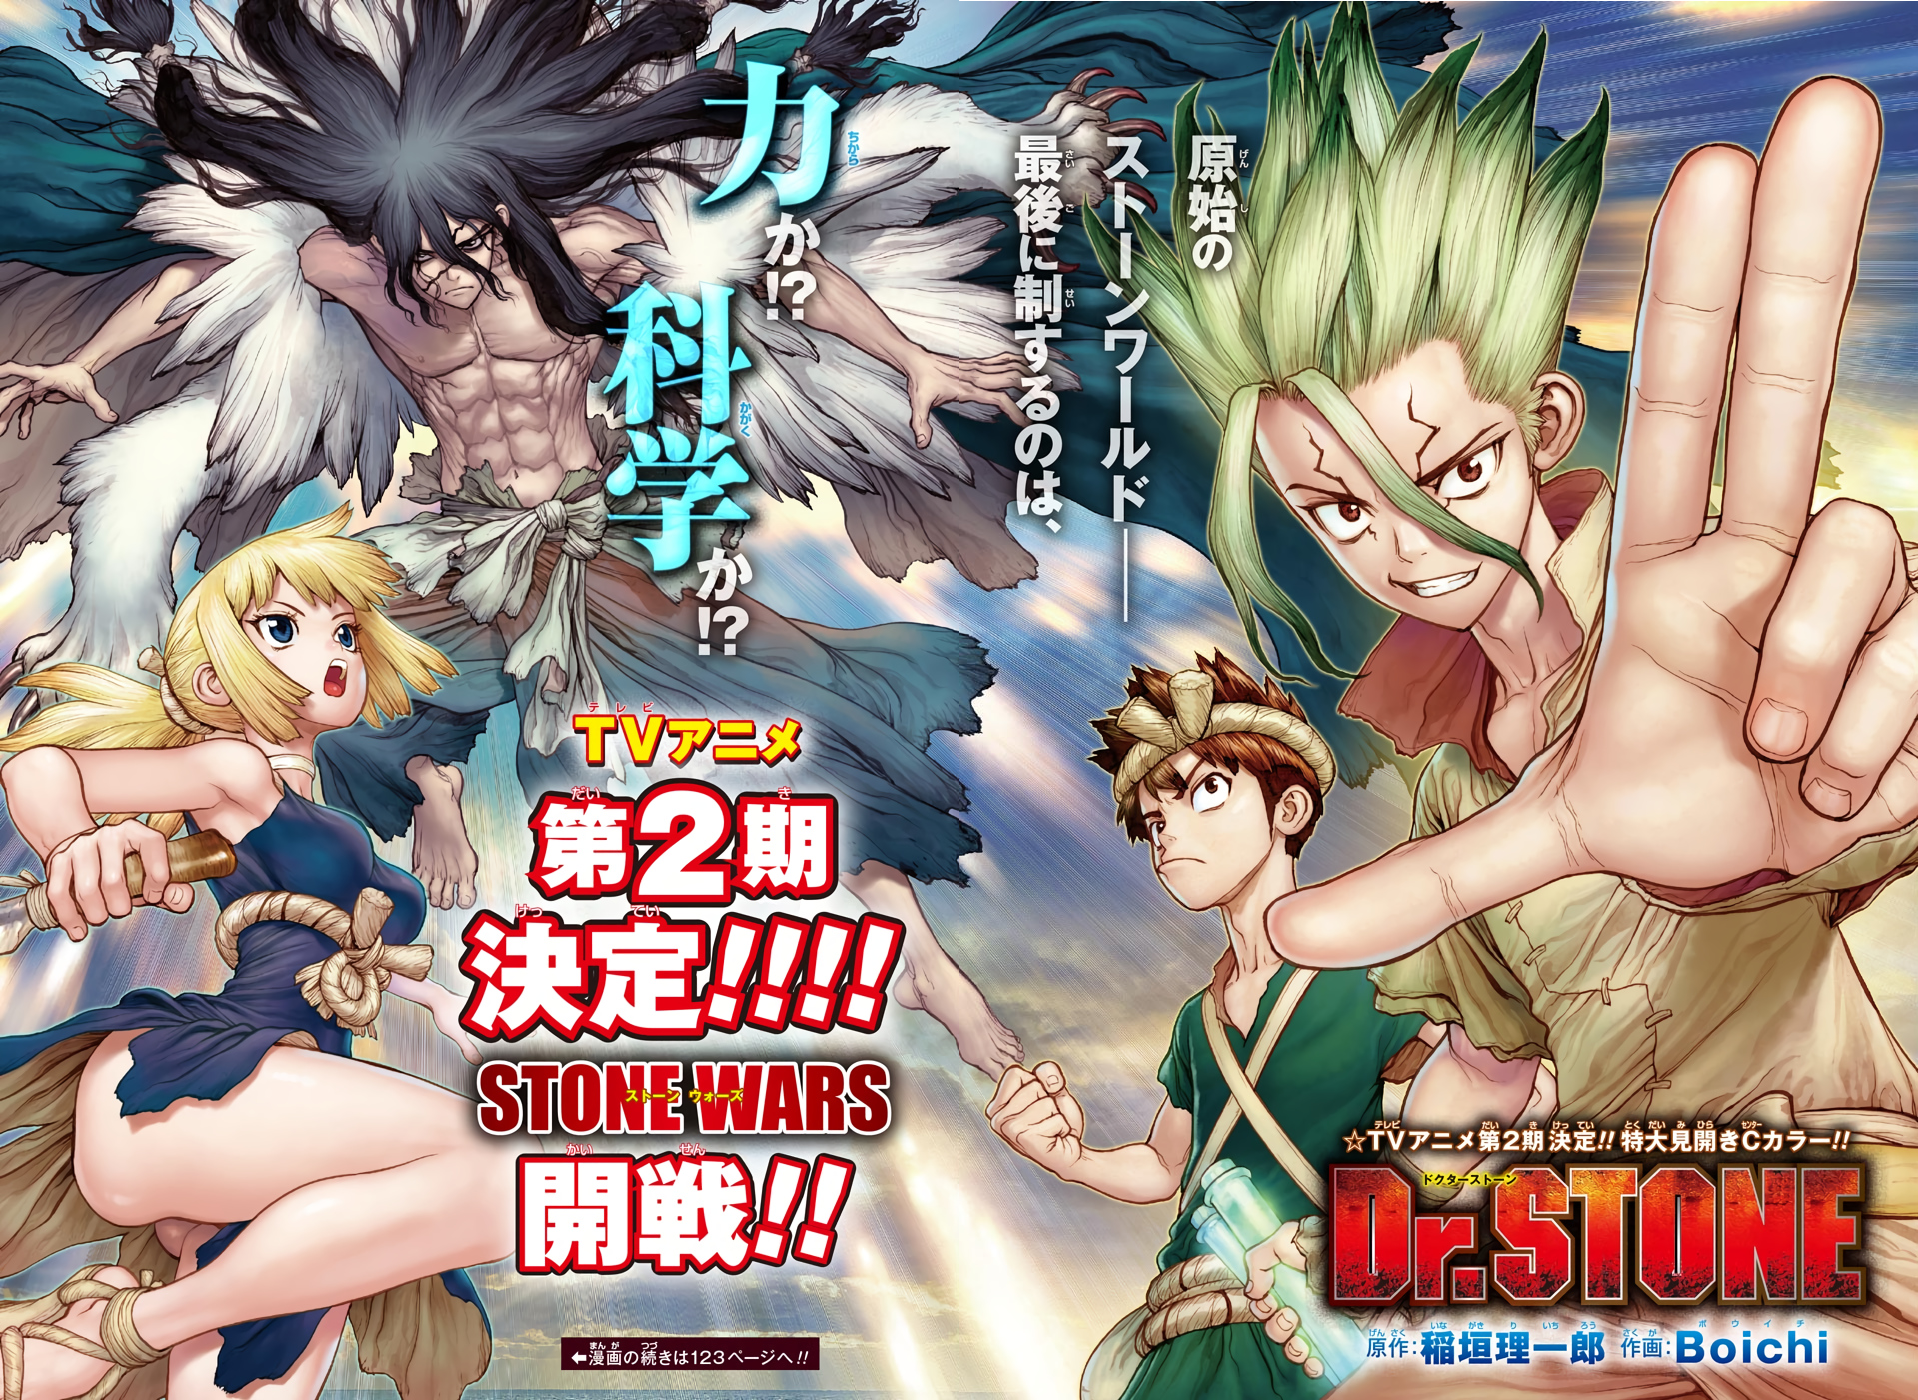 dr stone stone wars ep 1